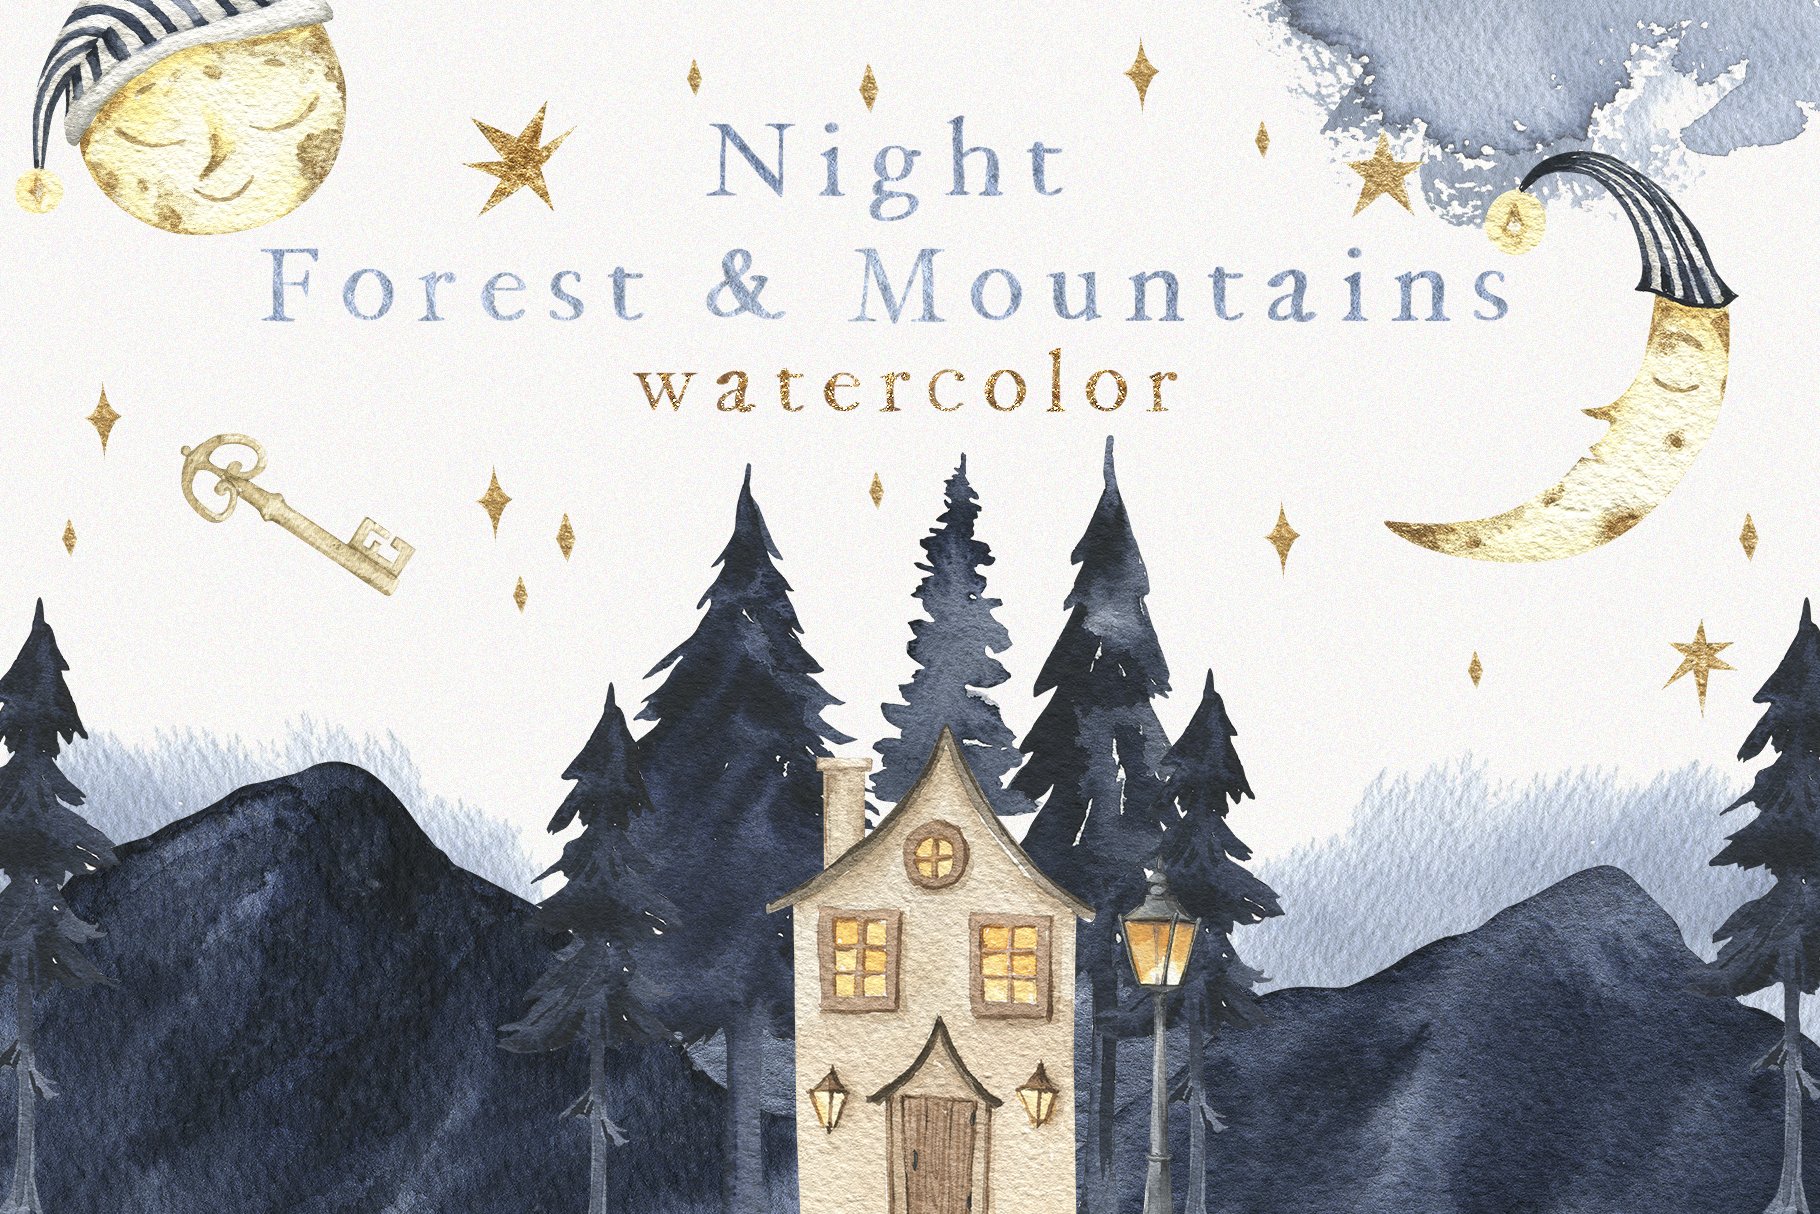 Night Forest & Mountains Watercolor cover image.